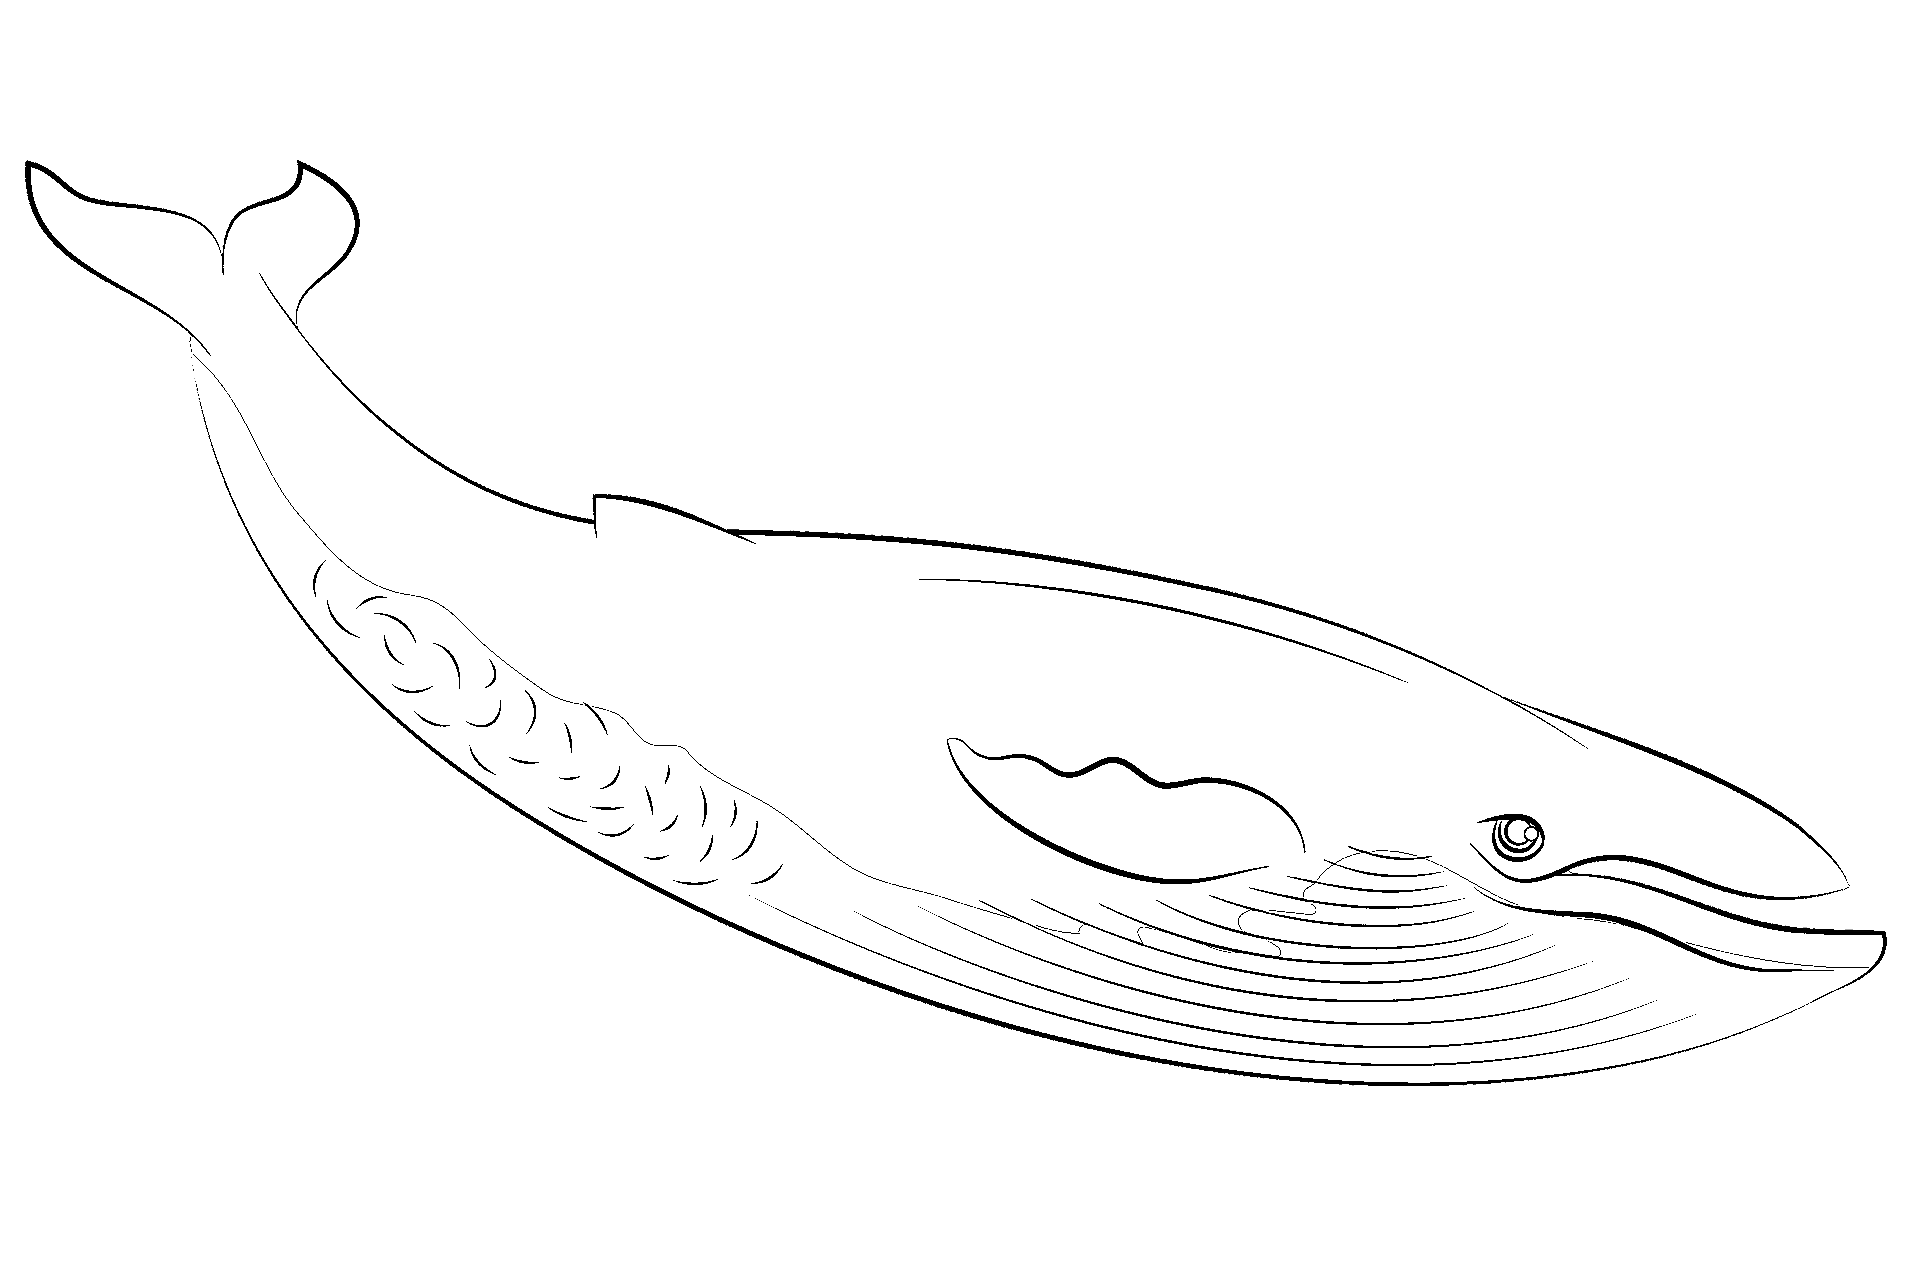 Coloring page of a blue whale